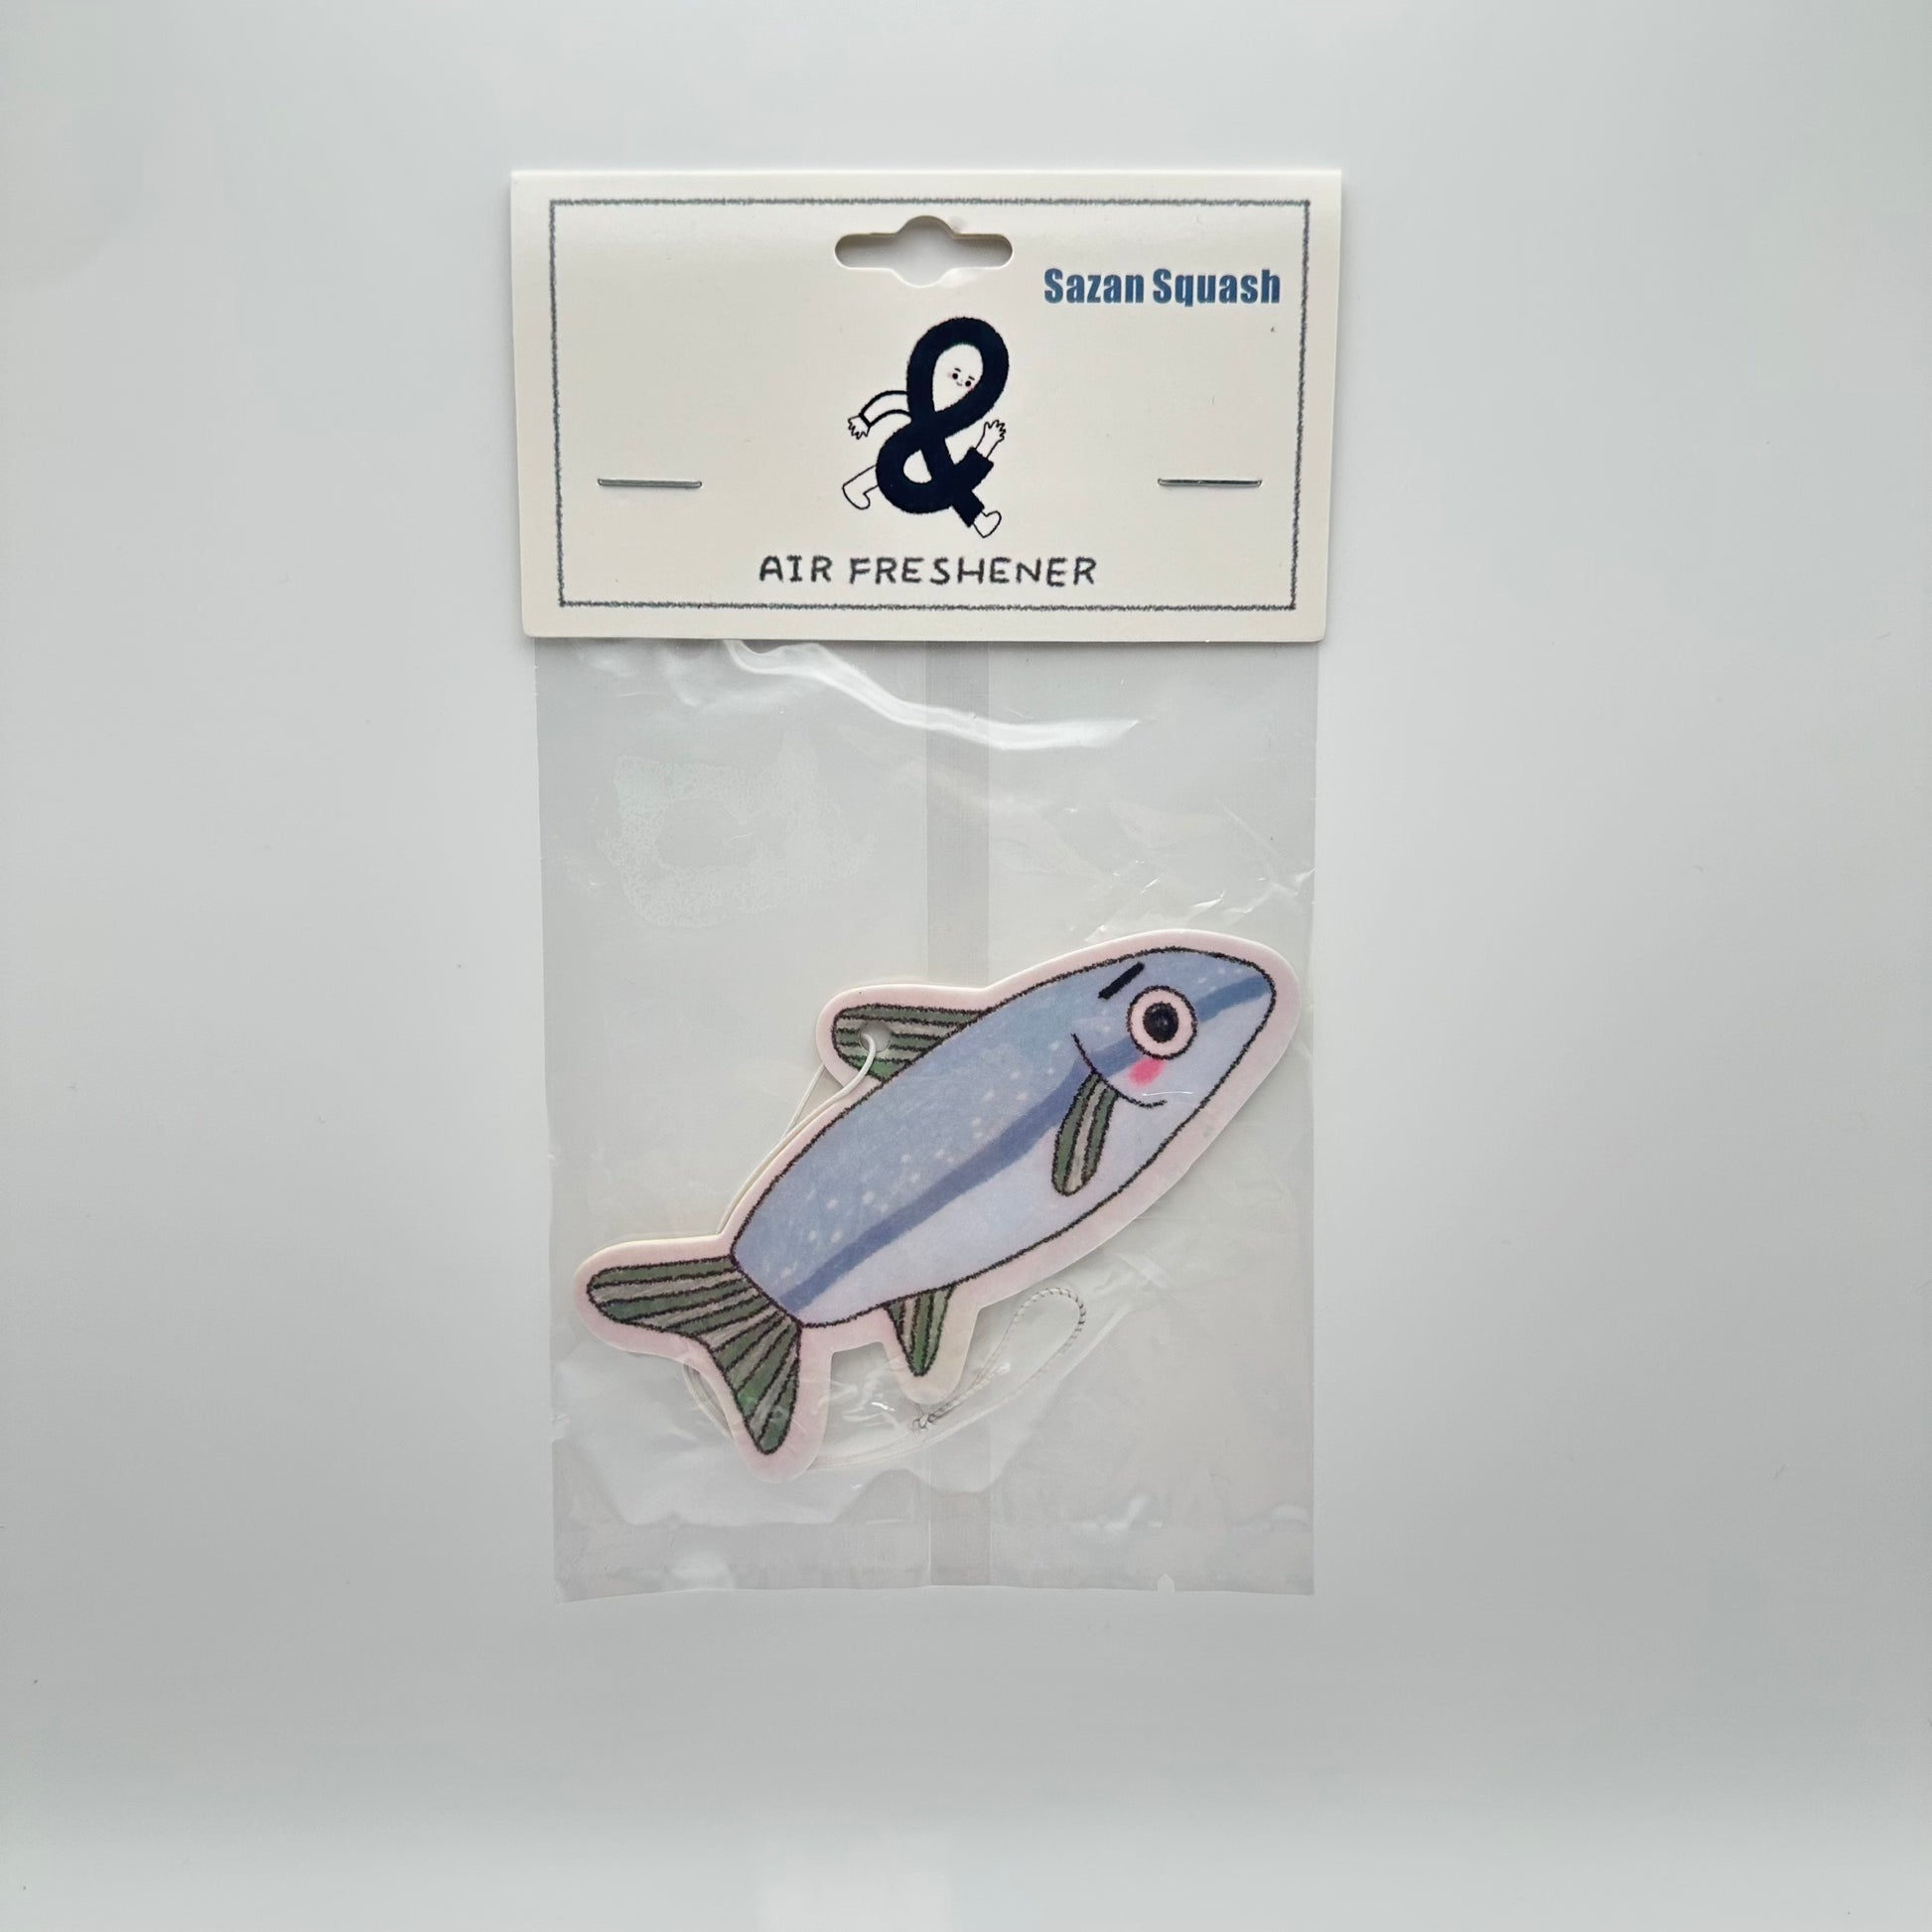 Anchovy car air freshener in package that has the scent Sazan Squash.